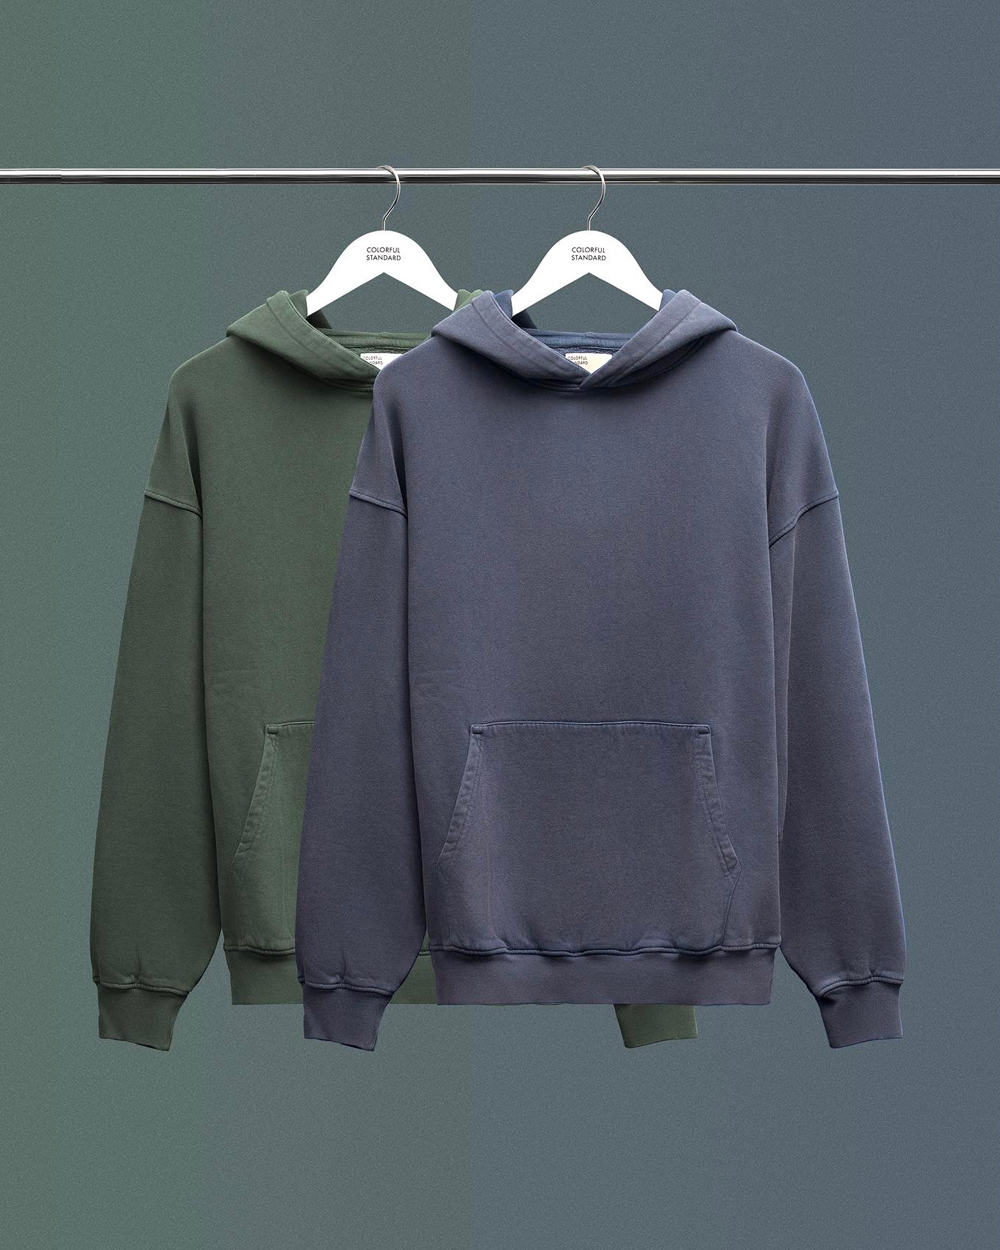 Two Colorful Standard oversized hoodies in green and blue hanging on a rail